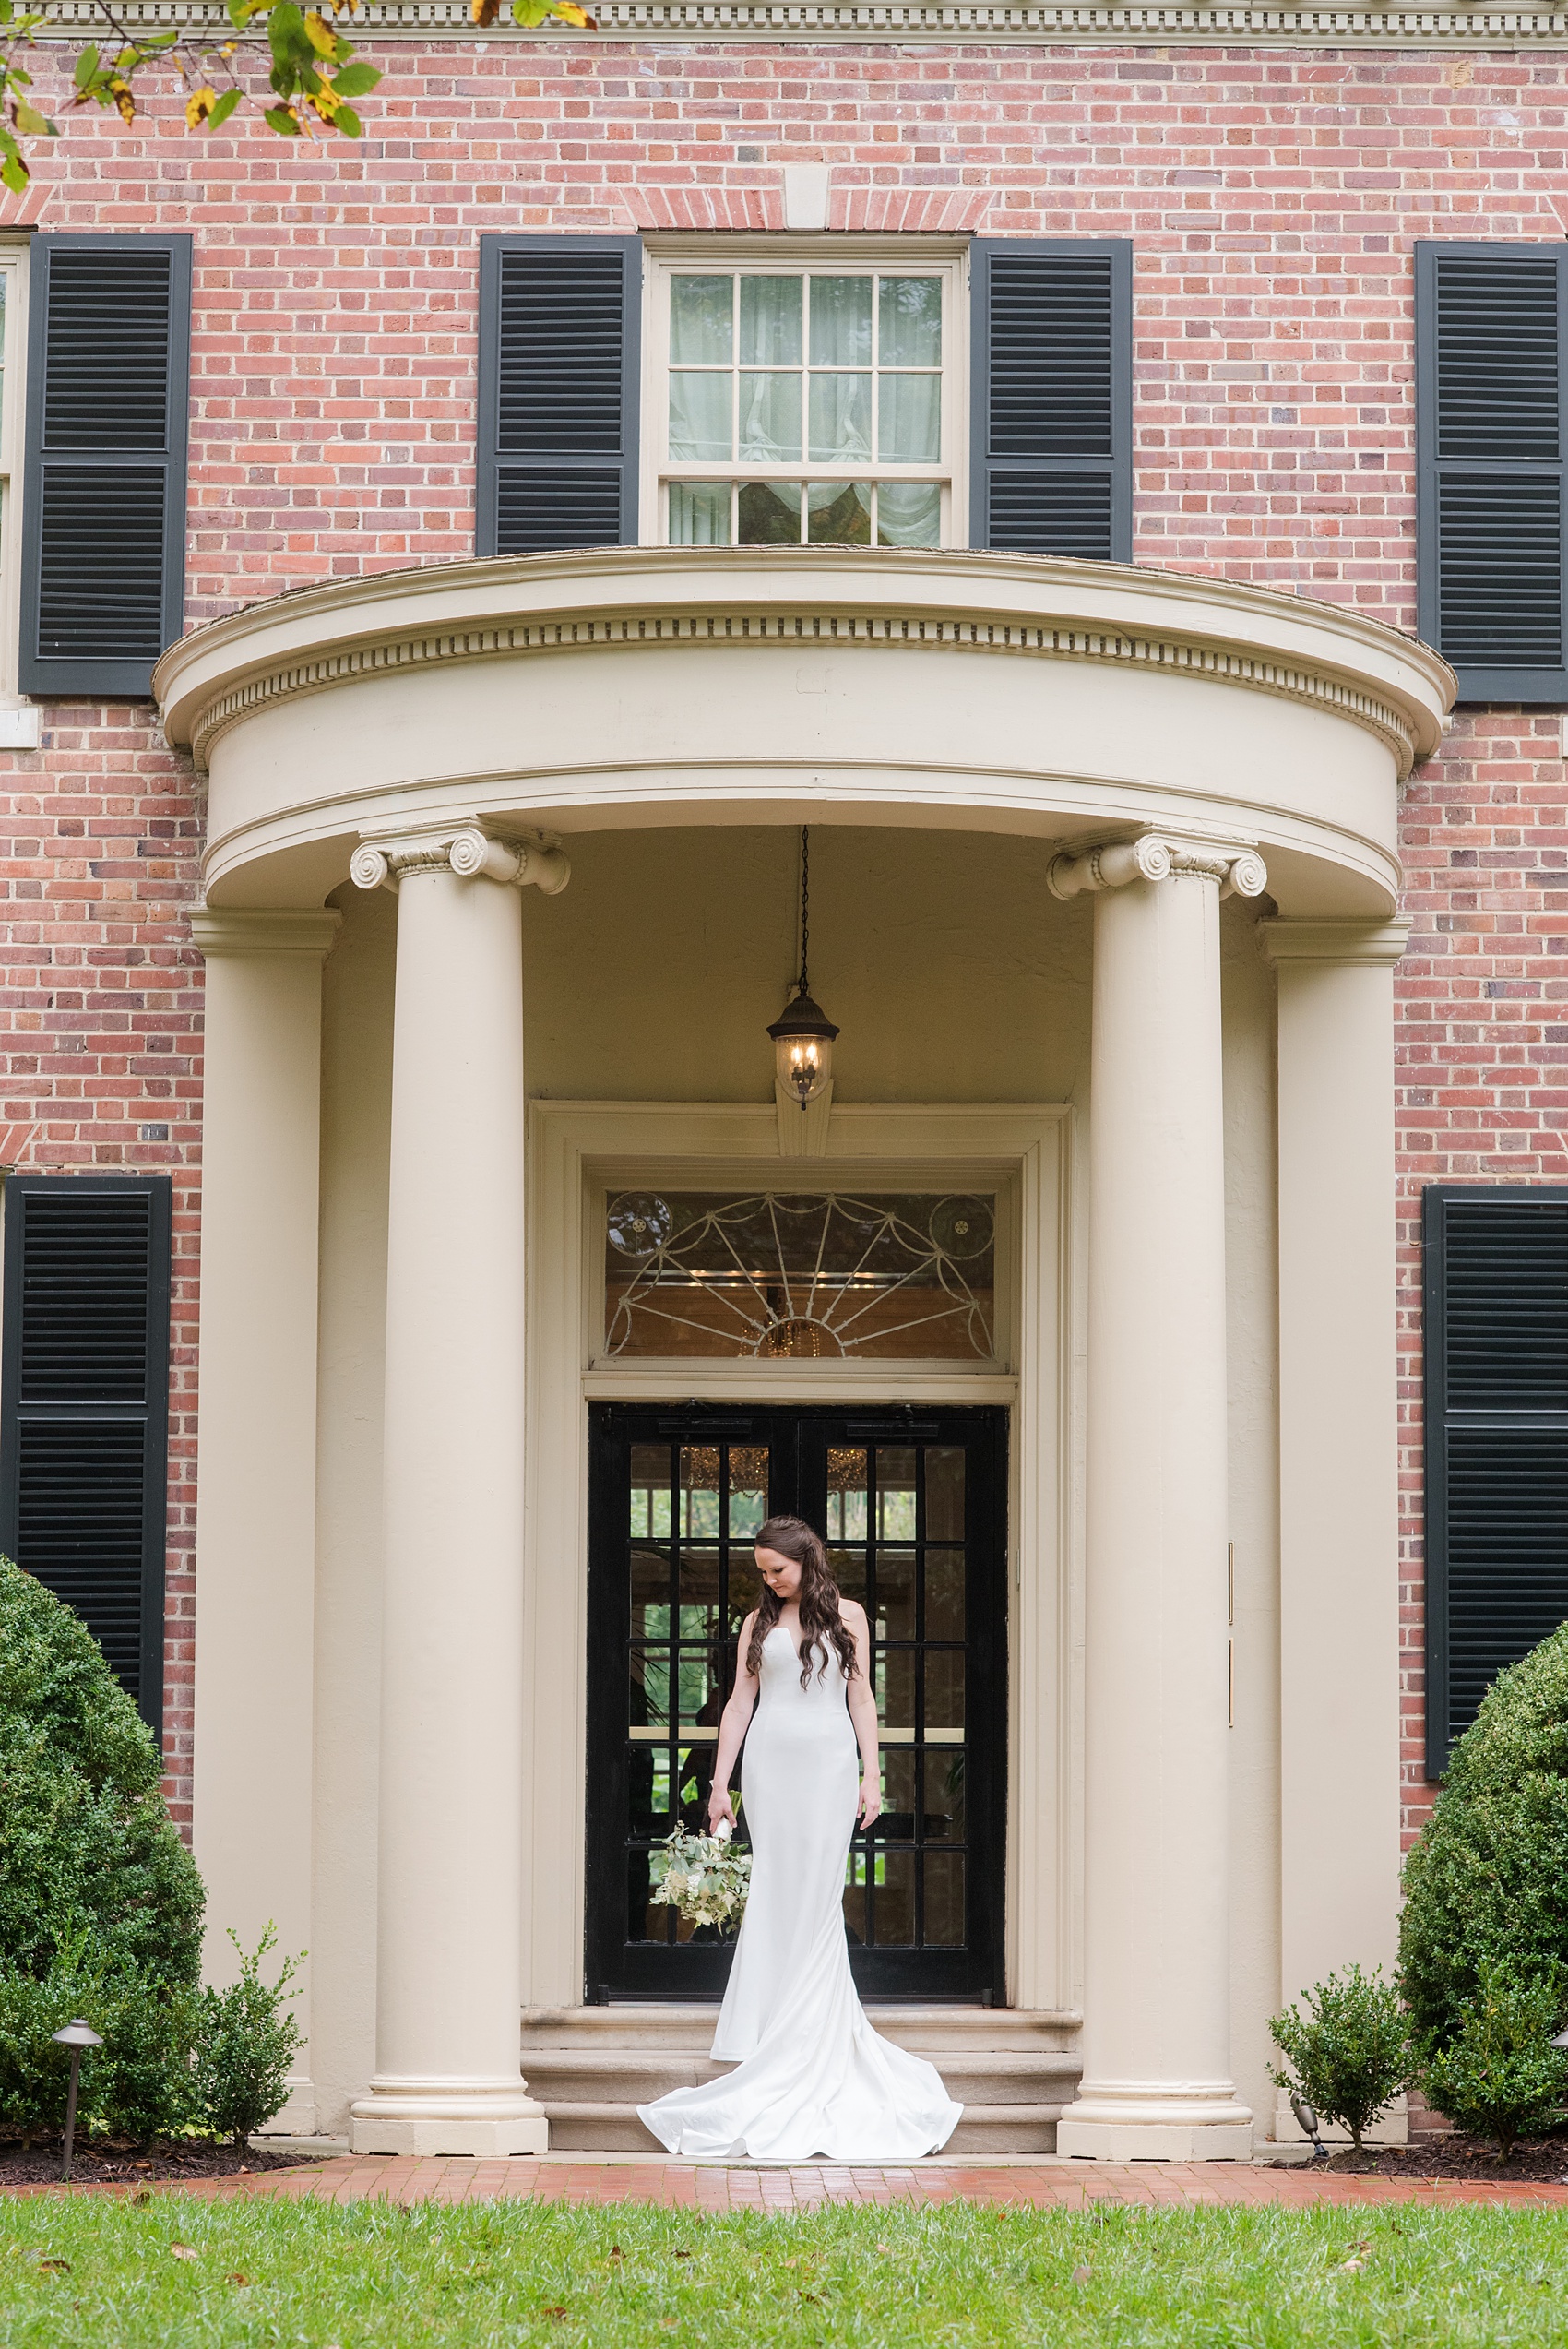 Photos of a fall wedding at The Carolina Inn, in Chapel Hill North Carolina, by Mikkel Paige Photography. This event venue doubles as a hotel for guests, who can enjoy a reception and ceremony indoors or outdoors. The bride wore a beautiful, simple white gown with a v-neck cut out and a cathedral length veil. Click through to see inspiration from the entire wedding! Planner: @asouthernsoiree #thecarolinainn #ChapelHillWeddings #MikkelPaige #ASouthernSoiree #bride #bridestyle #simpleweddinggown